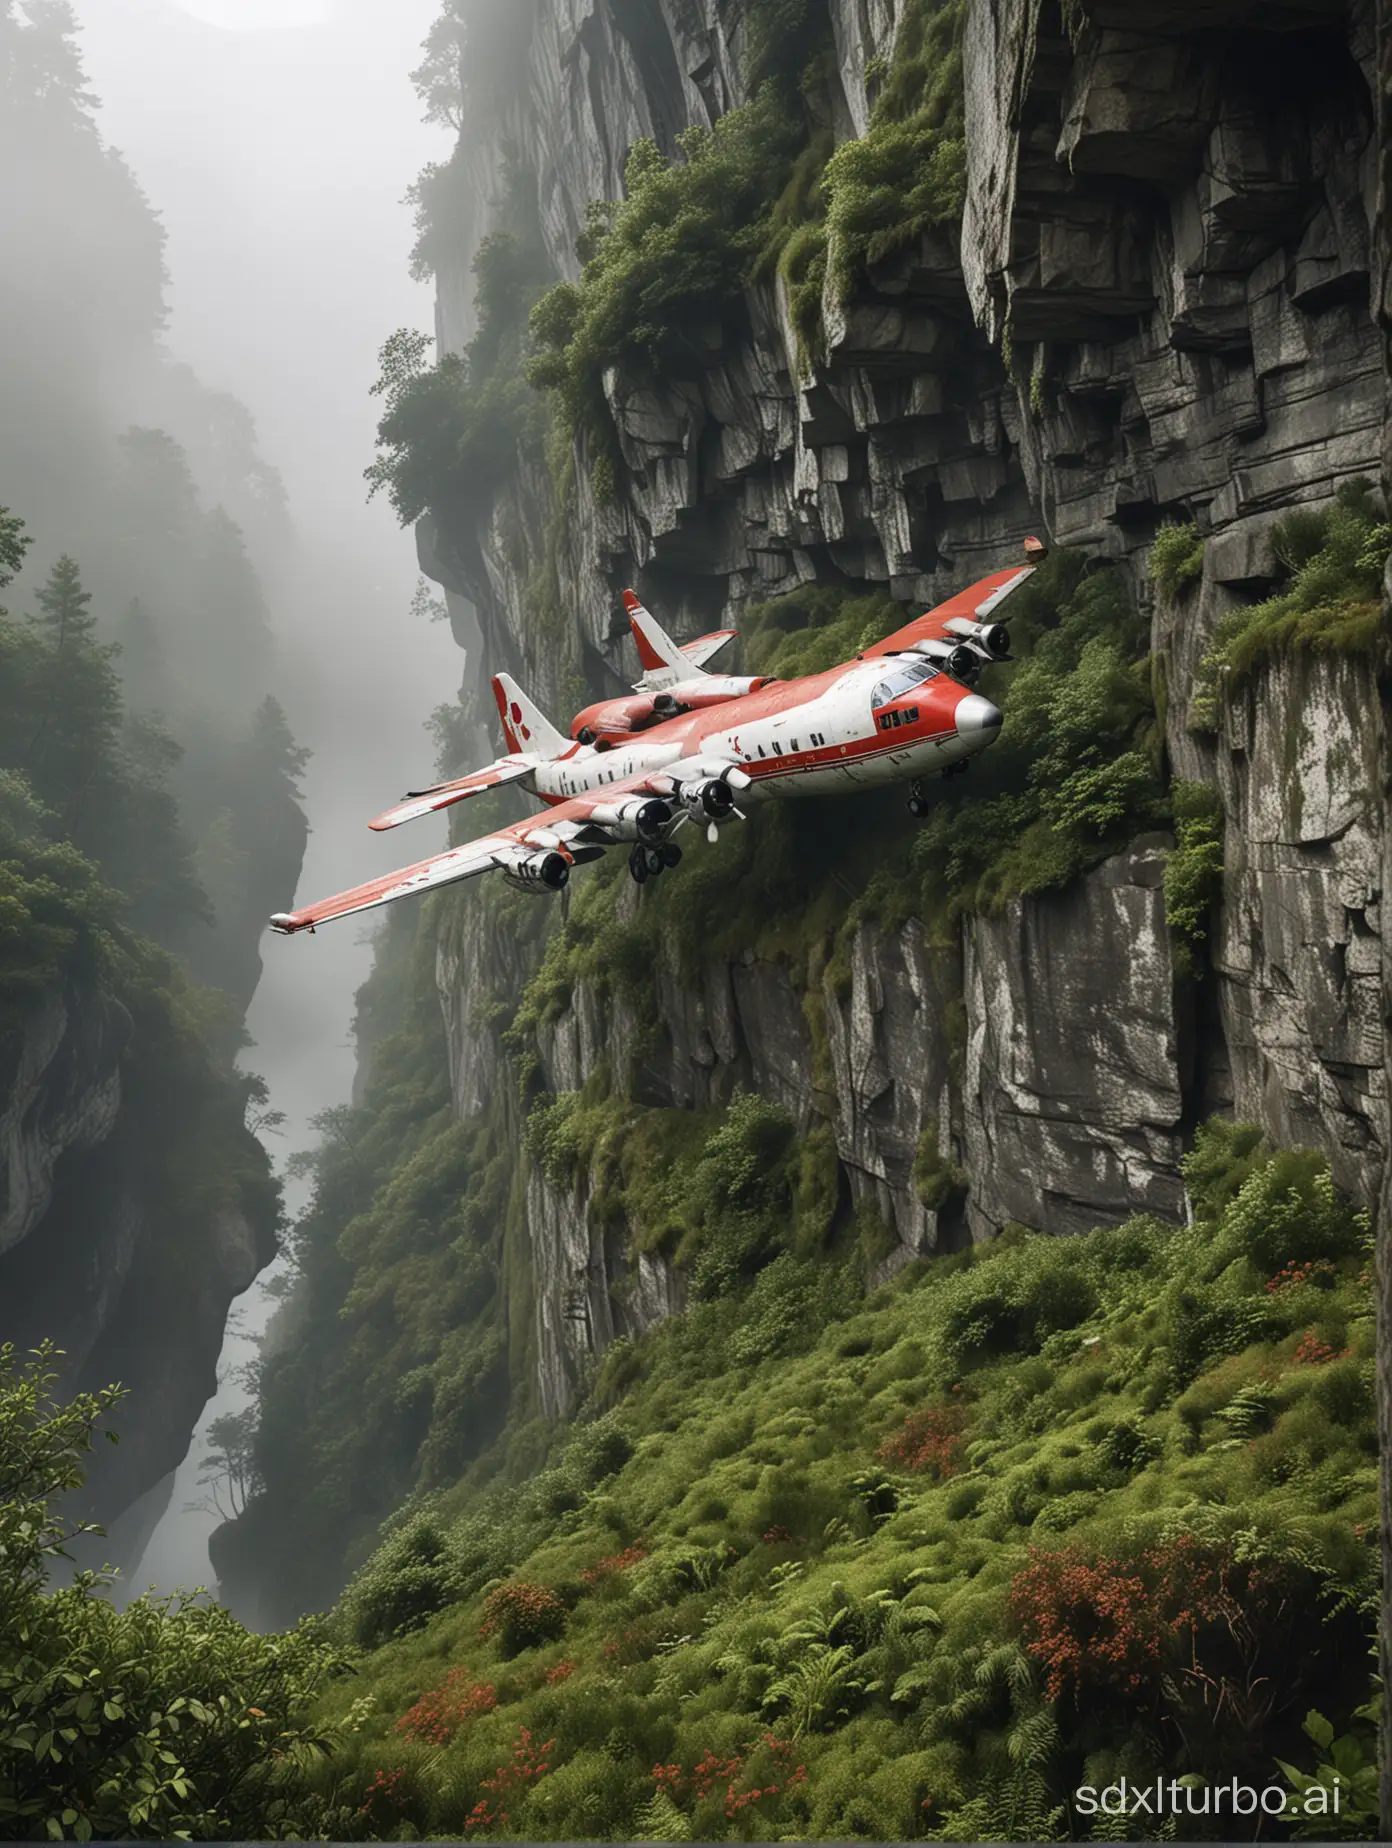 Eerie-Abandoned-Red-and-White-Airplane-on-Cliff-Edge-Over-Misty-Valley